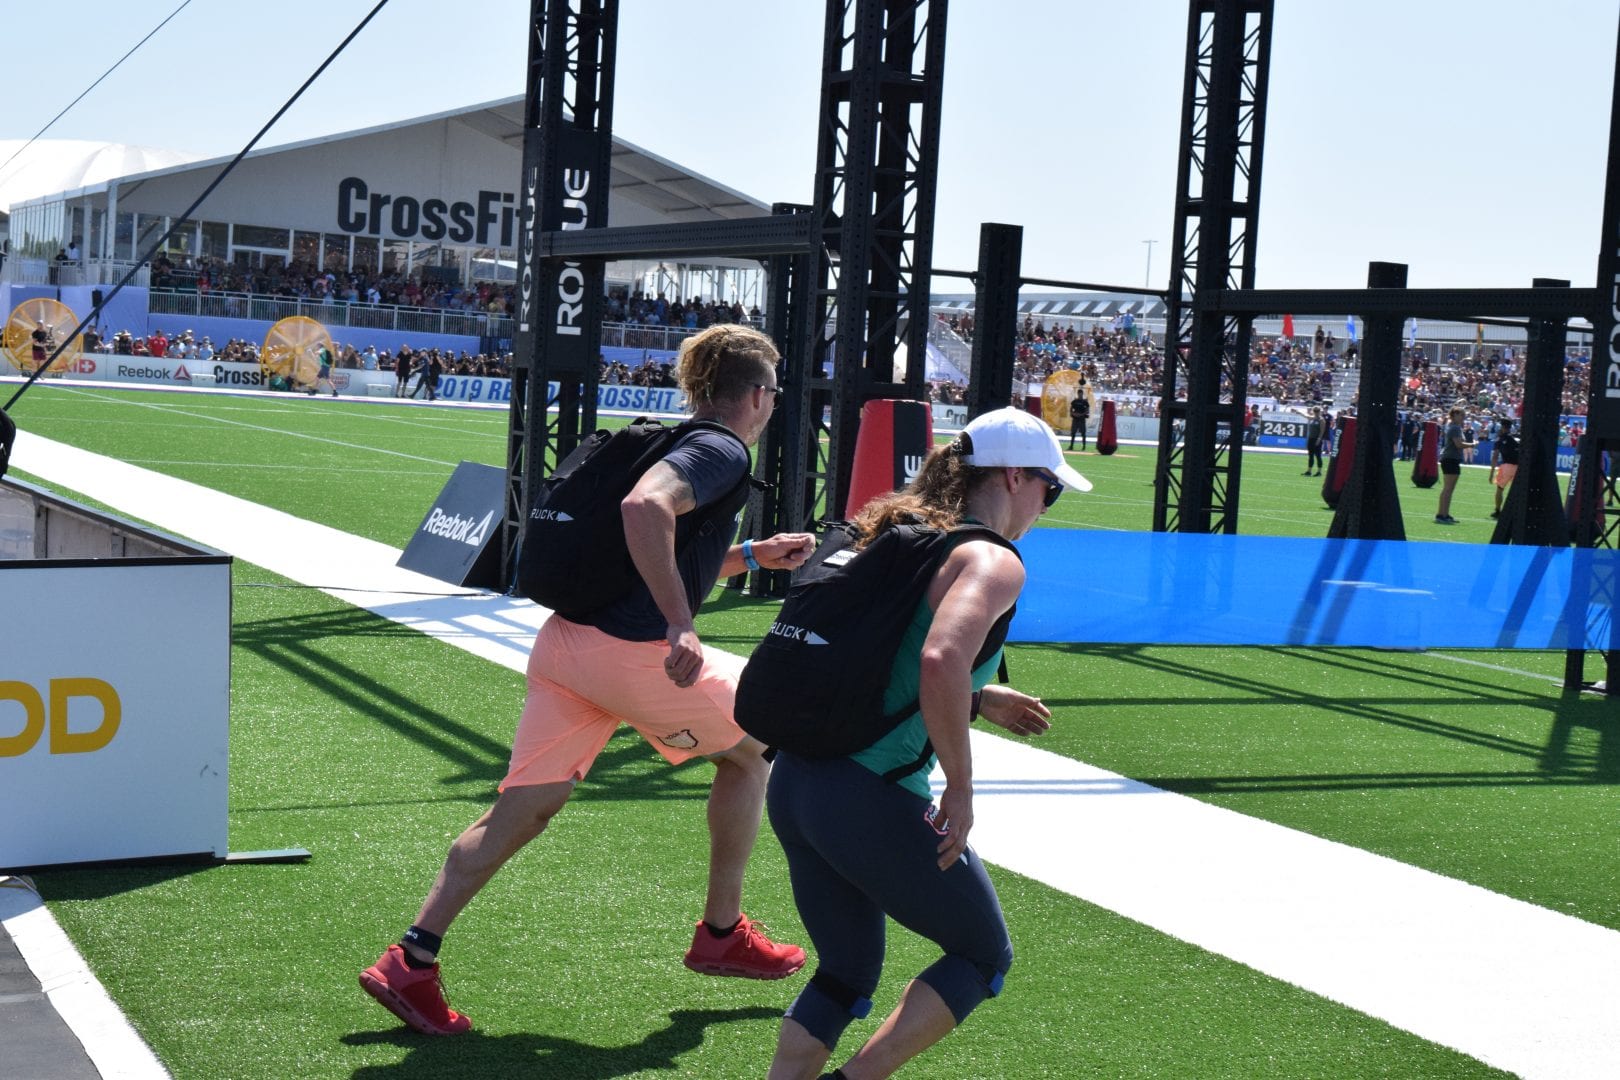 James Newbury of Australia completes the Ruck Run event at the 2019 CrossFit Games